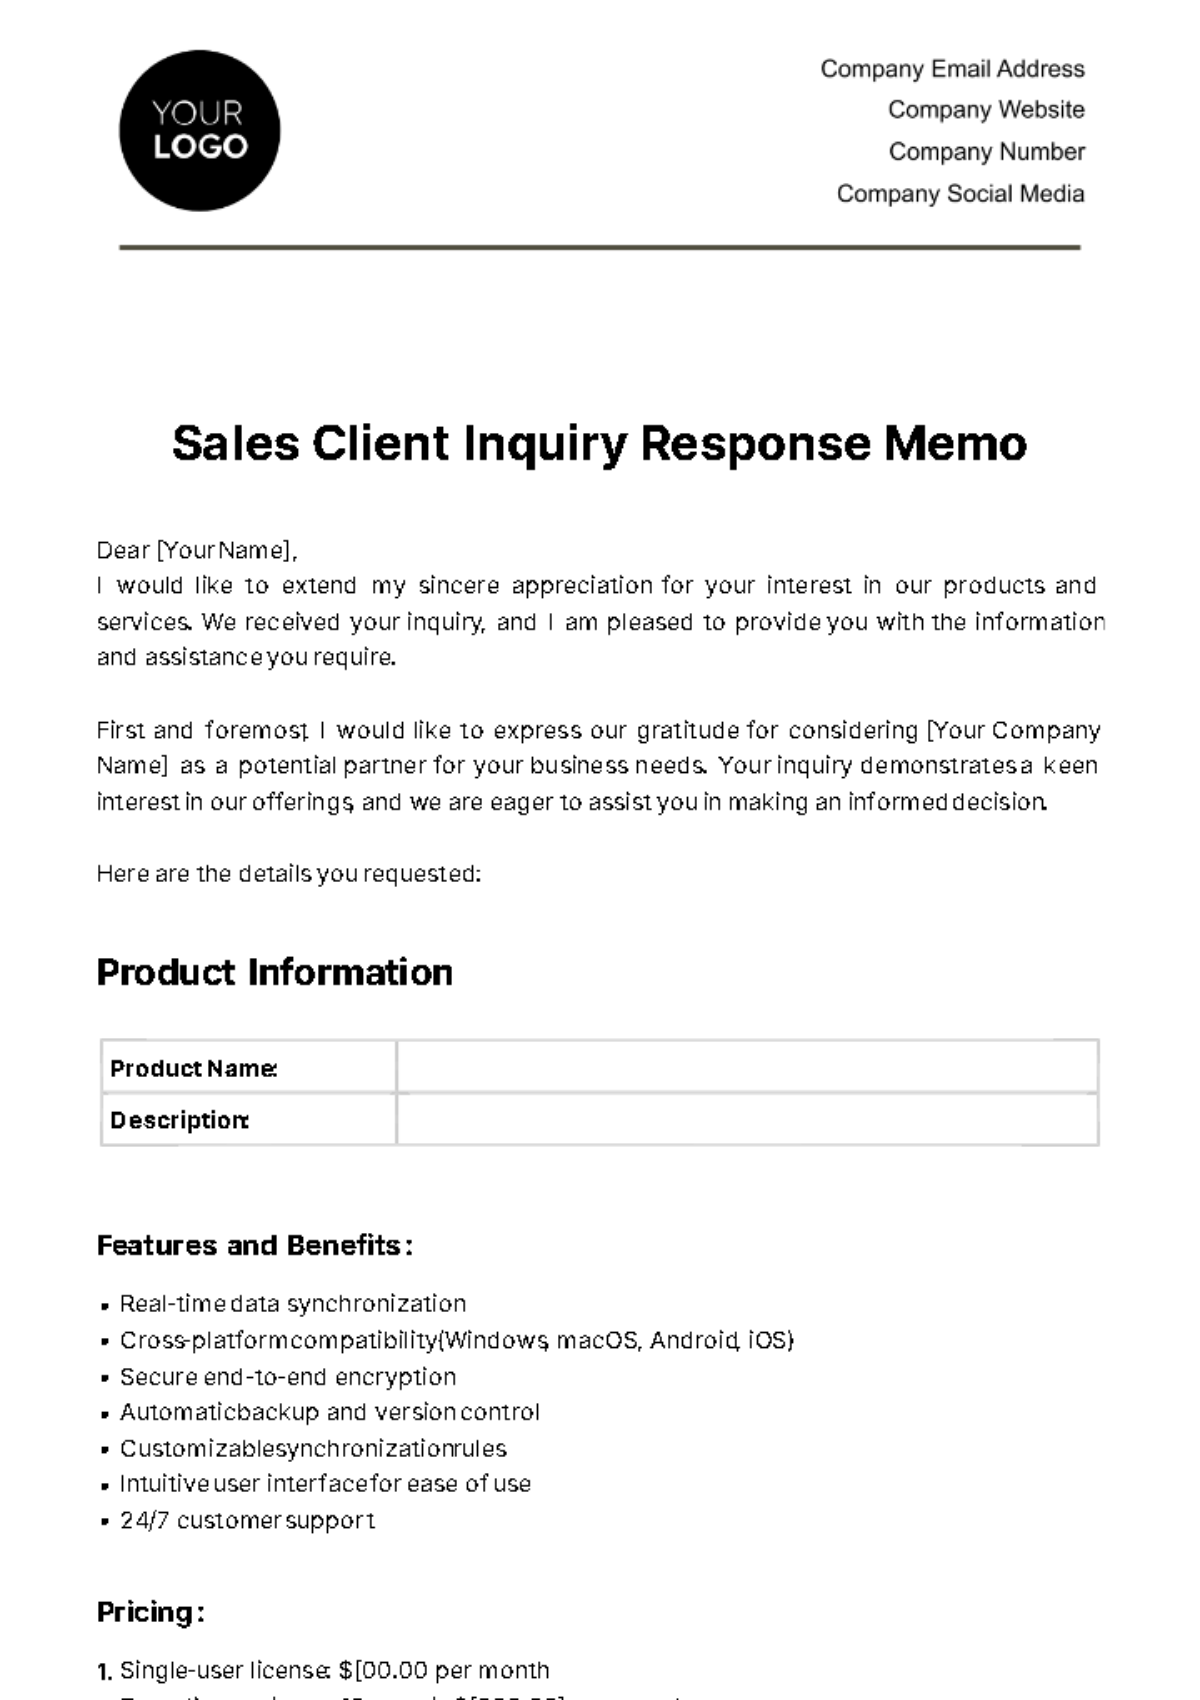 Free Sales Client Inquiry Response Memo Template